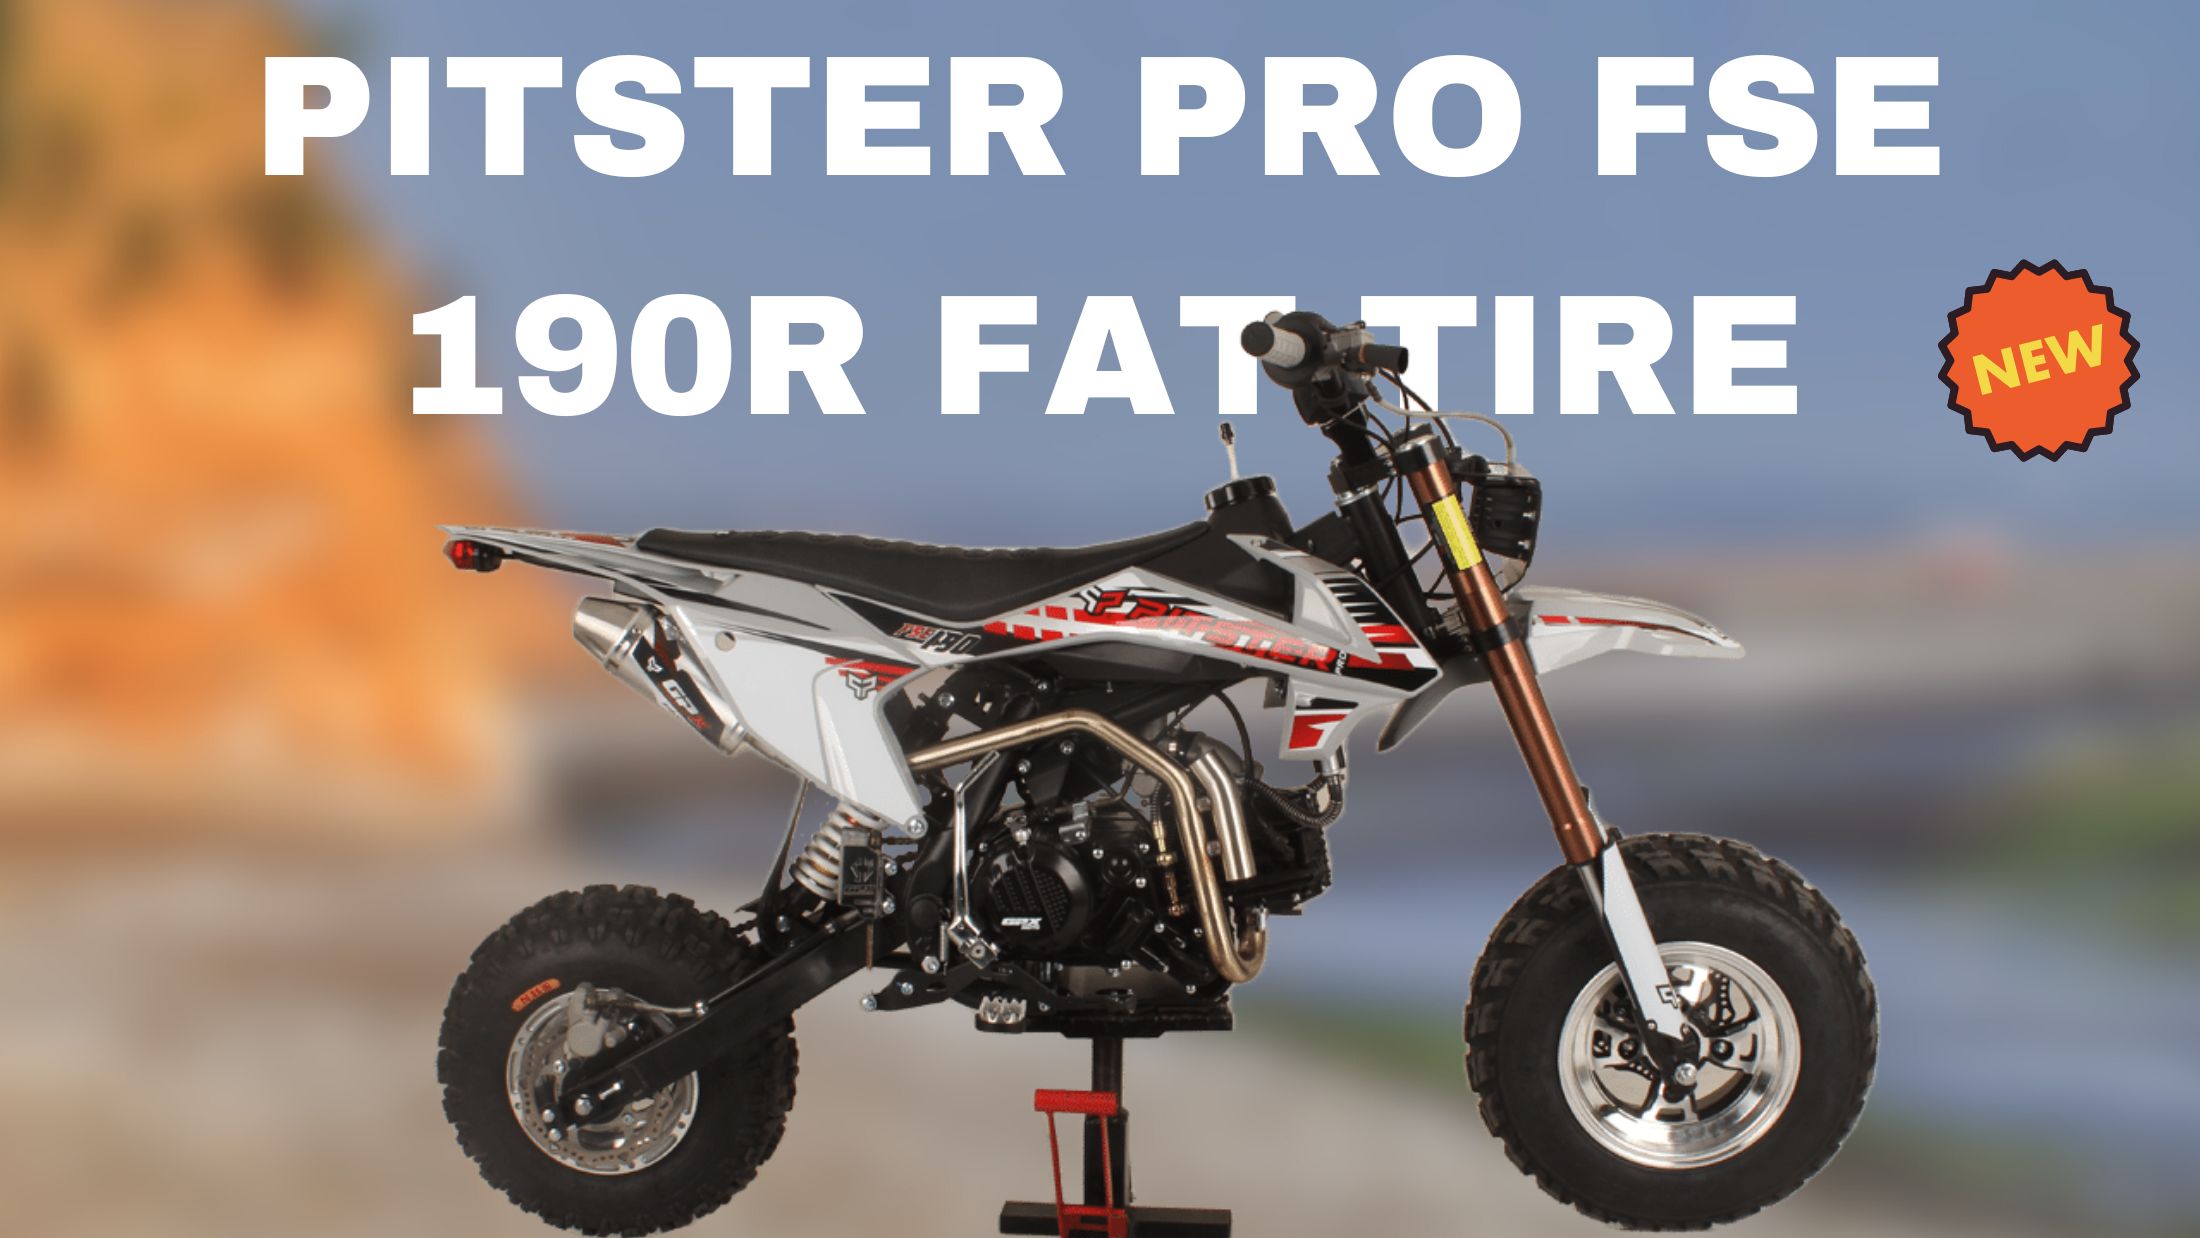 PITSTER PRO FSE 190R FAT TIRE